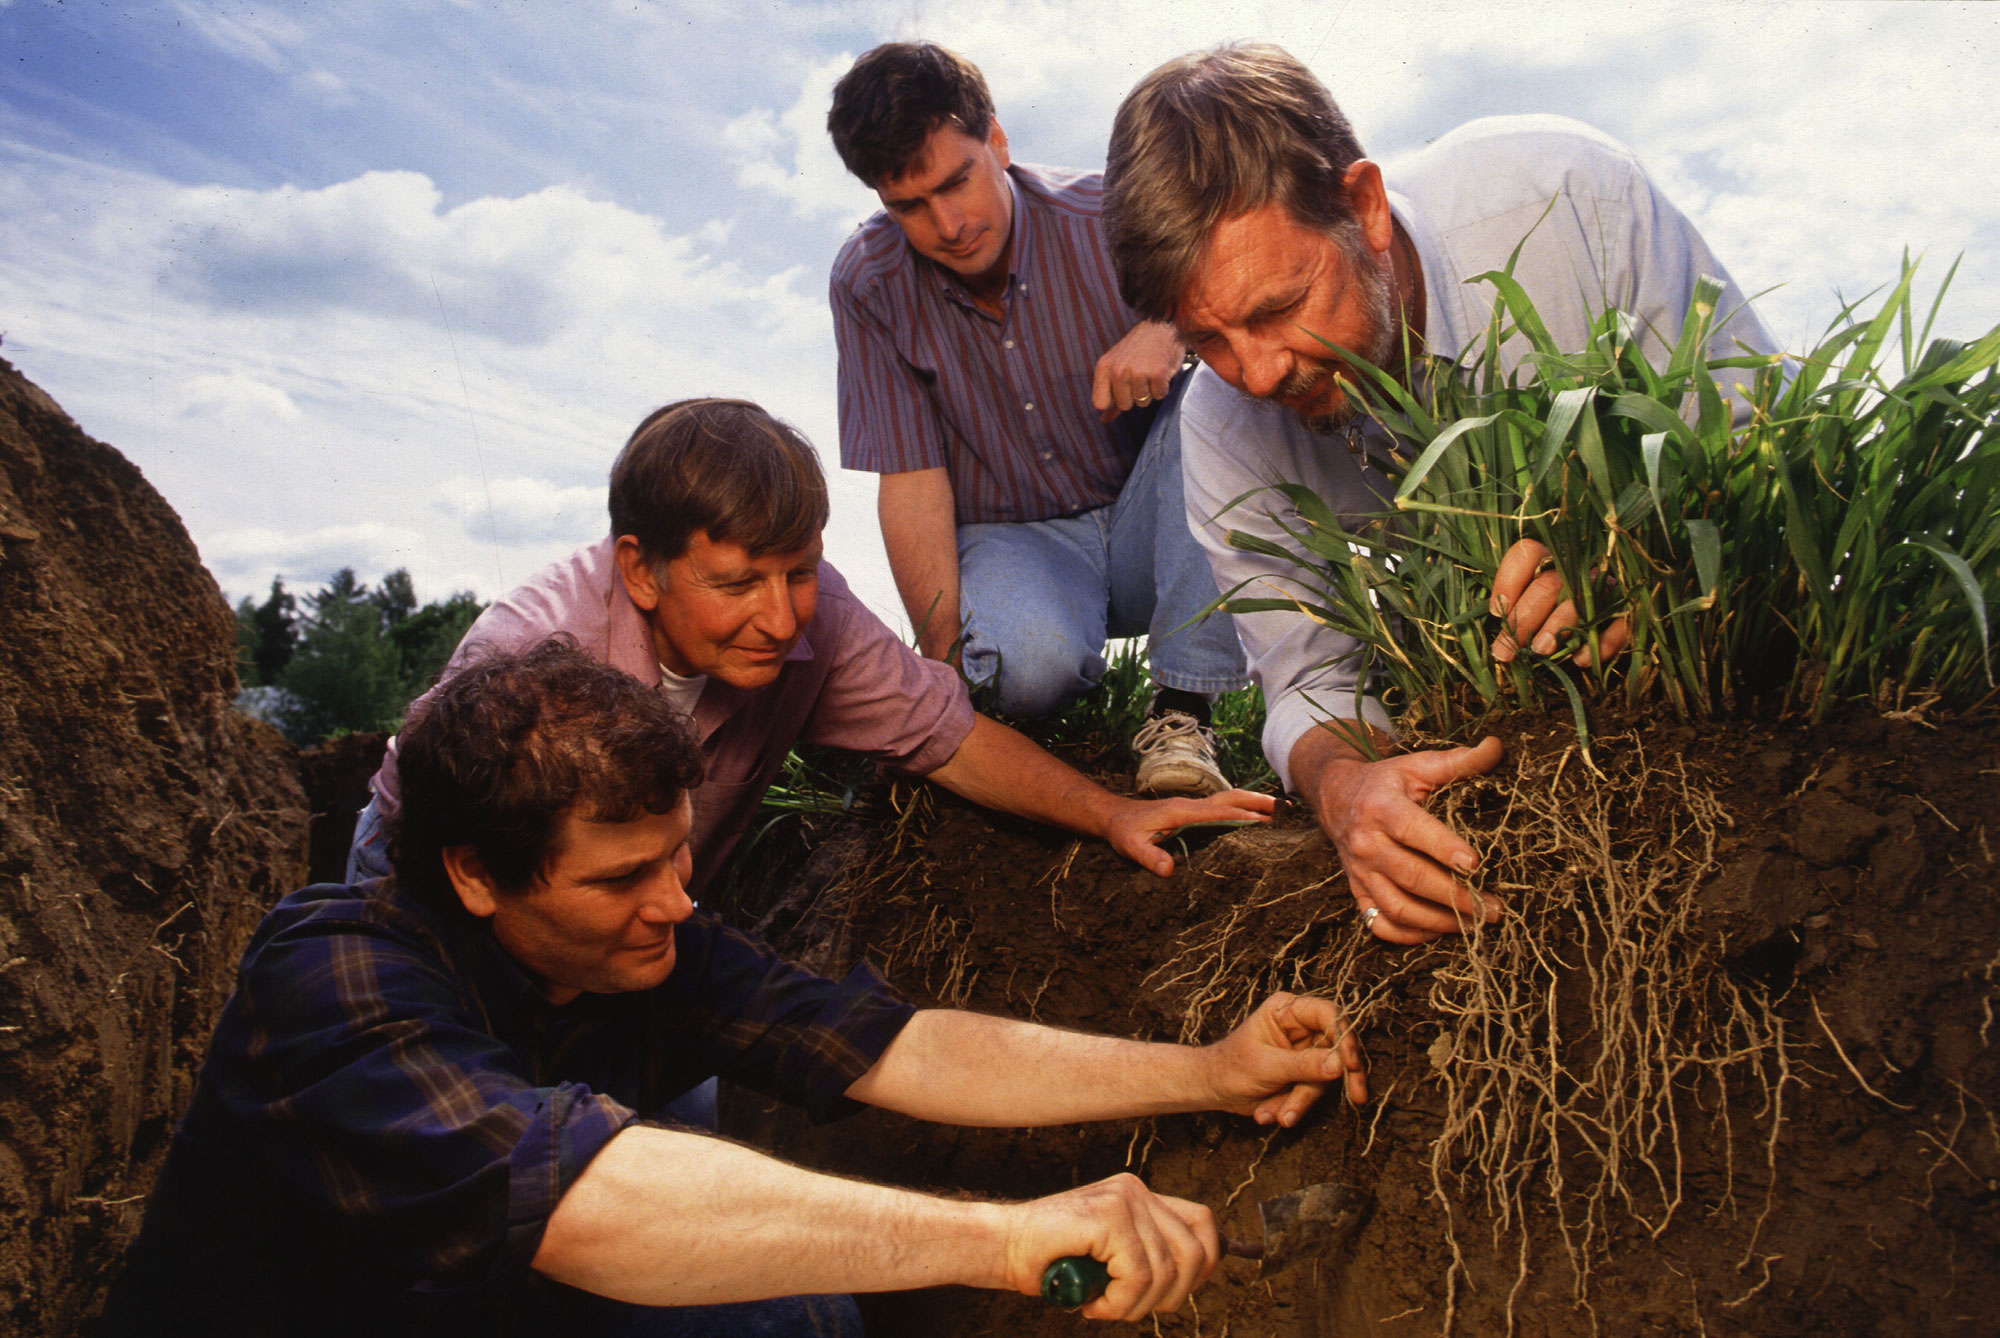 Photograph of four men excavating the roots of eastern gamagrass. The photo shows two men in a trench and two men on the surface of the ground. The trench has been excavated to expose the roots of grass growing in the soil. All of the men appear to be looking at the roots.